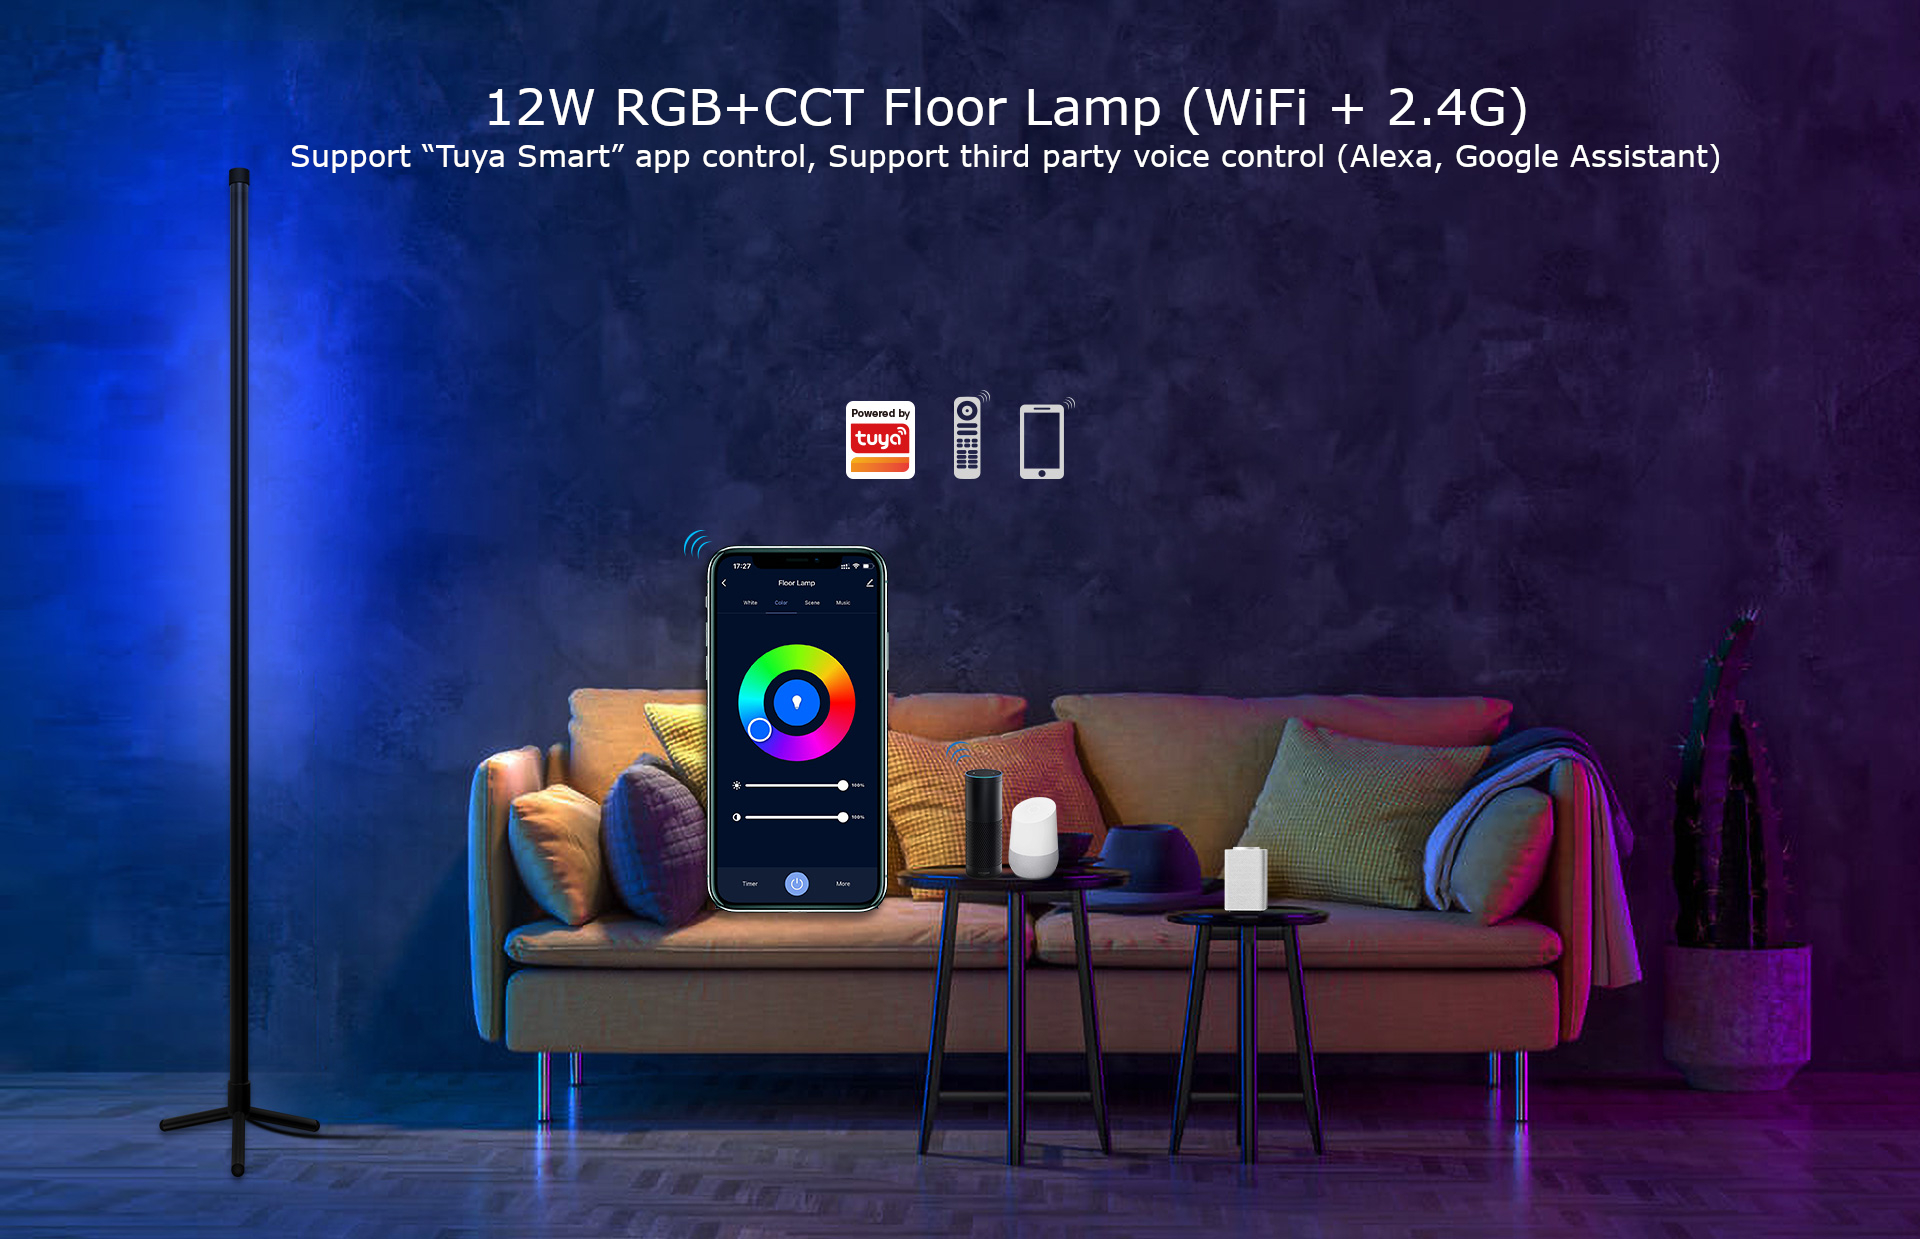 12W RGB+CCT Floor Lamp (WiFi + 2.4G) Support “Tuya Smart” app control, Support third party voice control (Alexa, Google Assistant)